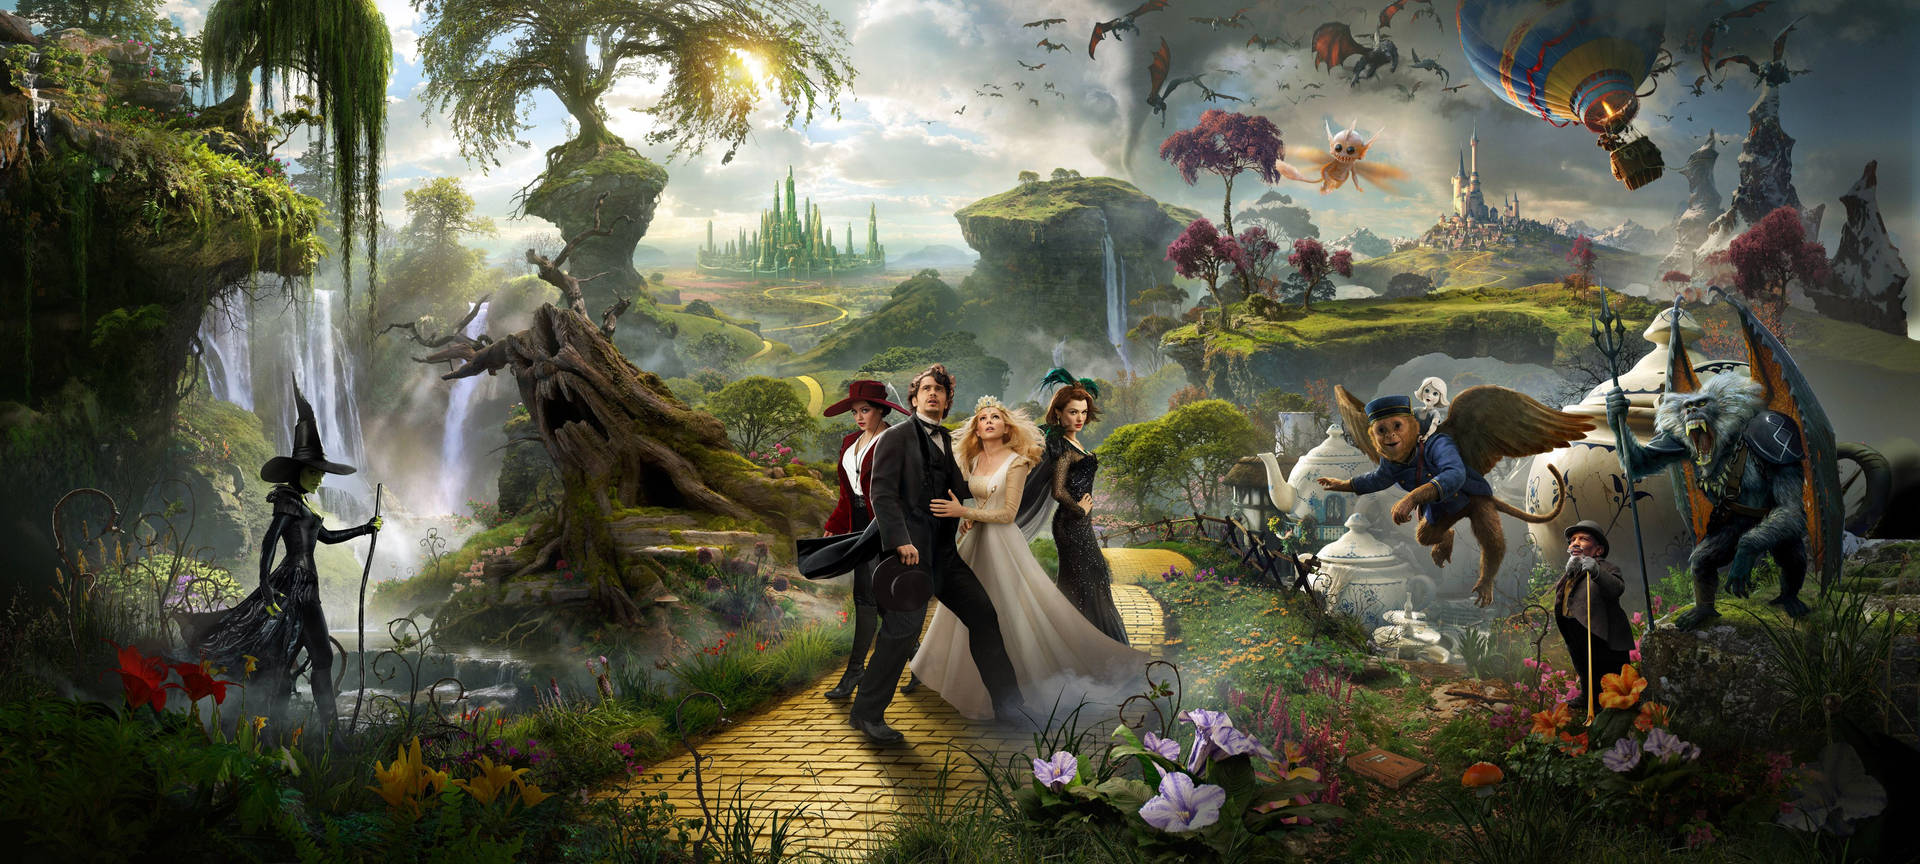 Oz The Great And Powerful Pictures Wallpaper